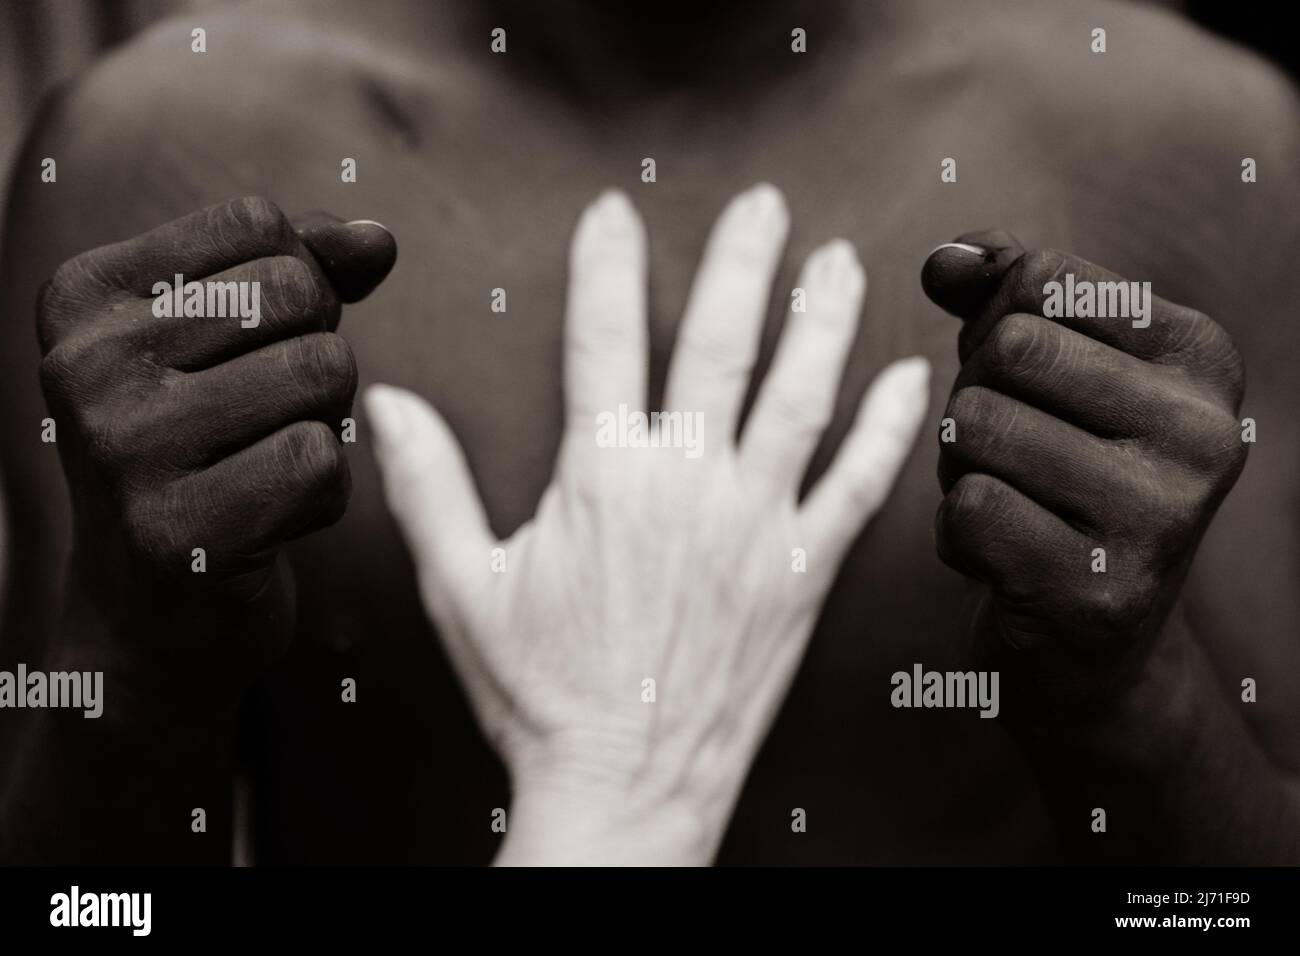 Black person's fist and white person's hand touching his chest Stock Photo